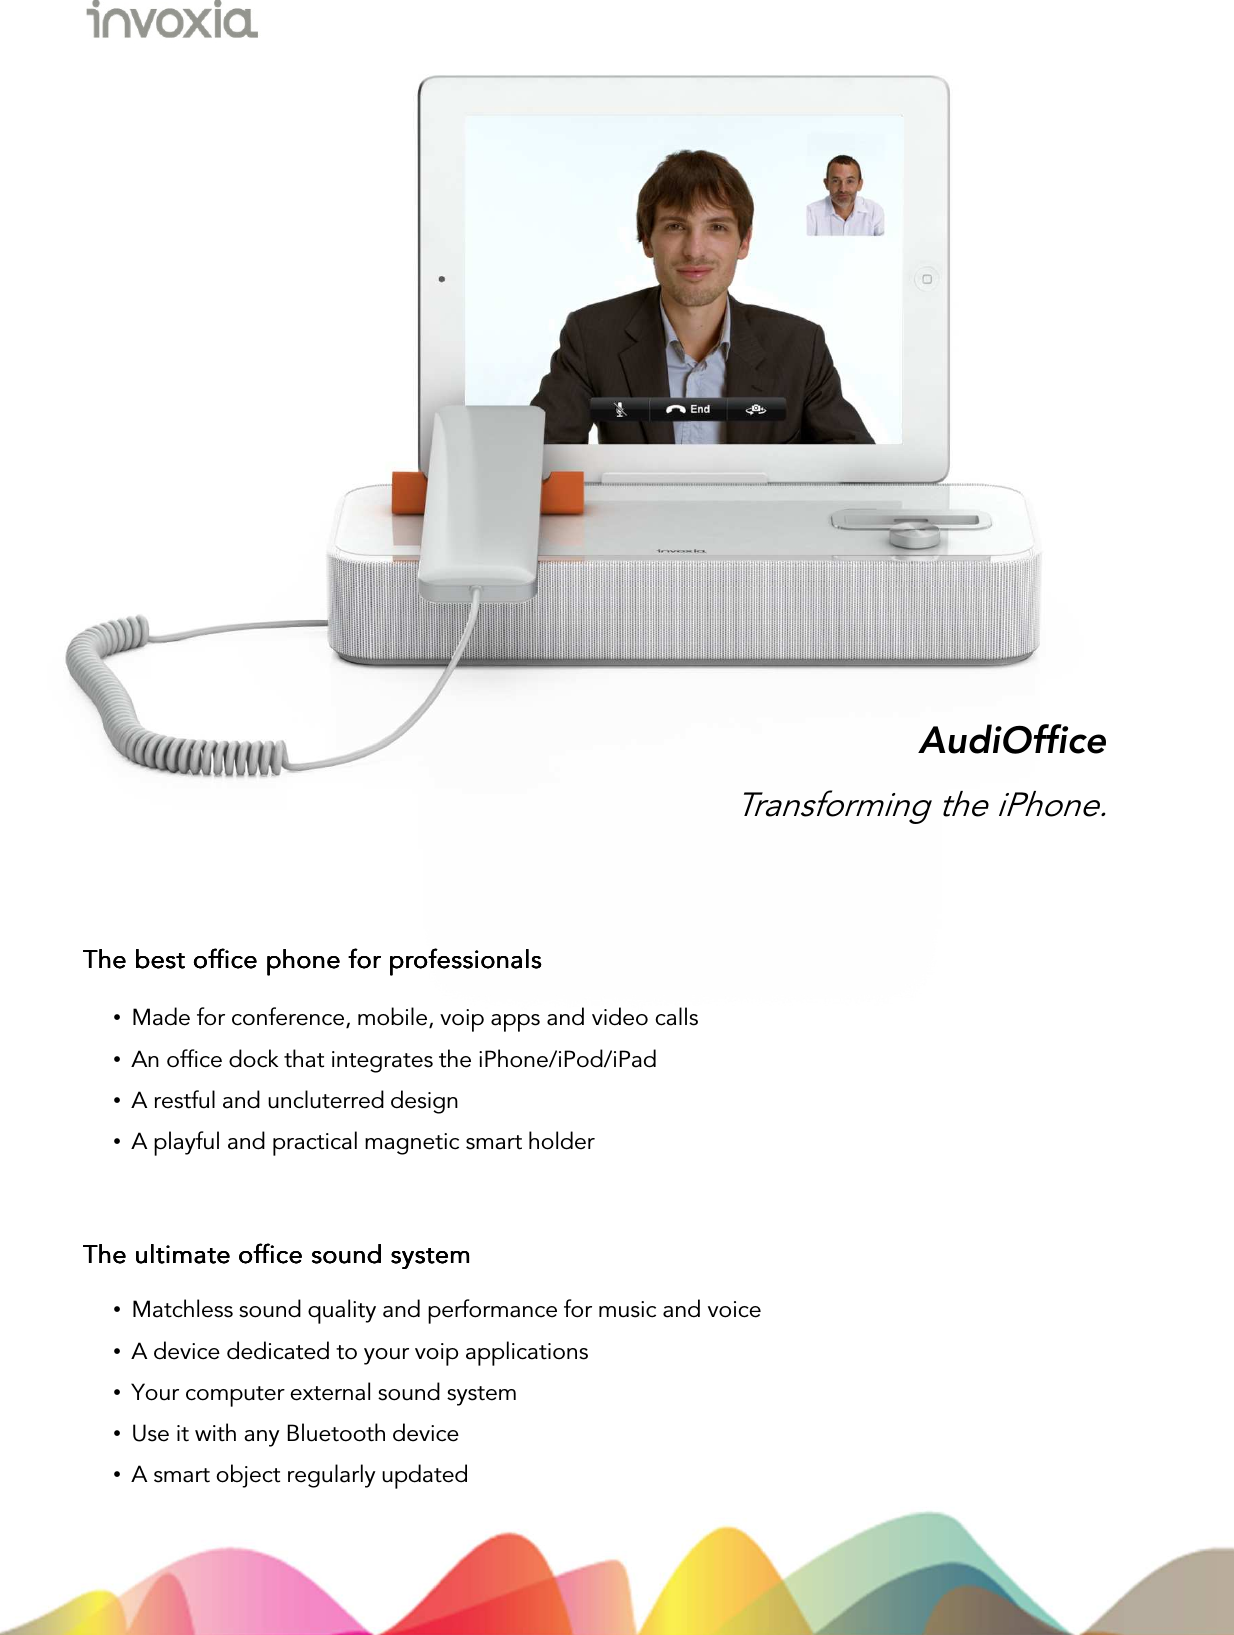 •Made for conference, mobile, voip apps and video calls•An office dock that integrates the iPhone/iPod/iPad•A restful and uncluterred design •A playful and practical magnetic smart holderAudiOfficeThe best office phone for professionalsThe best office phone for professionalsThe best office phone for professionalsThe best office phone for professionalsTransforming the iPhone.The ultimate office sound systemThe ultimate office sound systemThe ultimate office sound systemThe ultimate office sound system•Matchless sound quality and performance for music and voice•A device dedicated to your voip applications•Your computer external sound system •Use it with any Bluetooth device•A smart object regularly updated